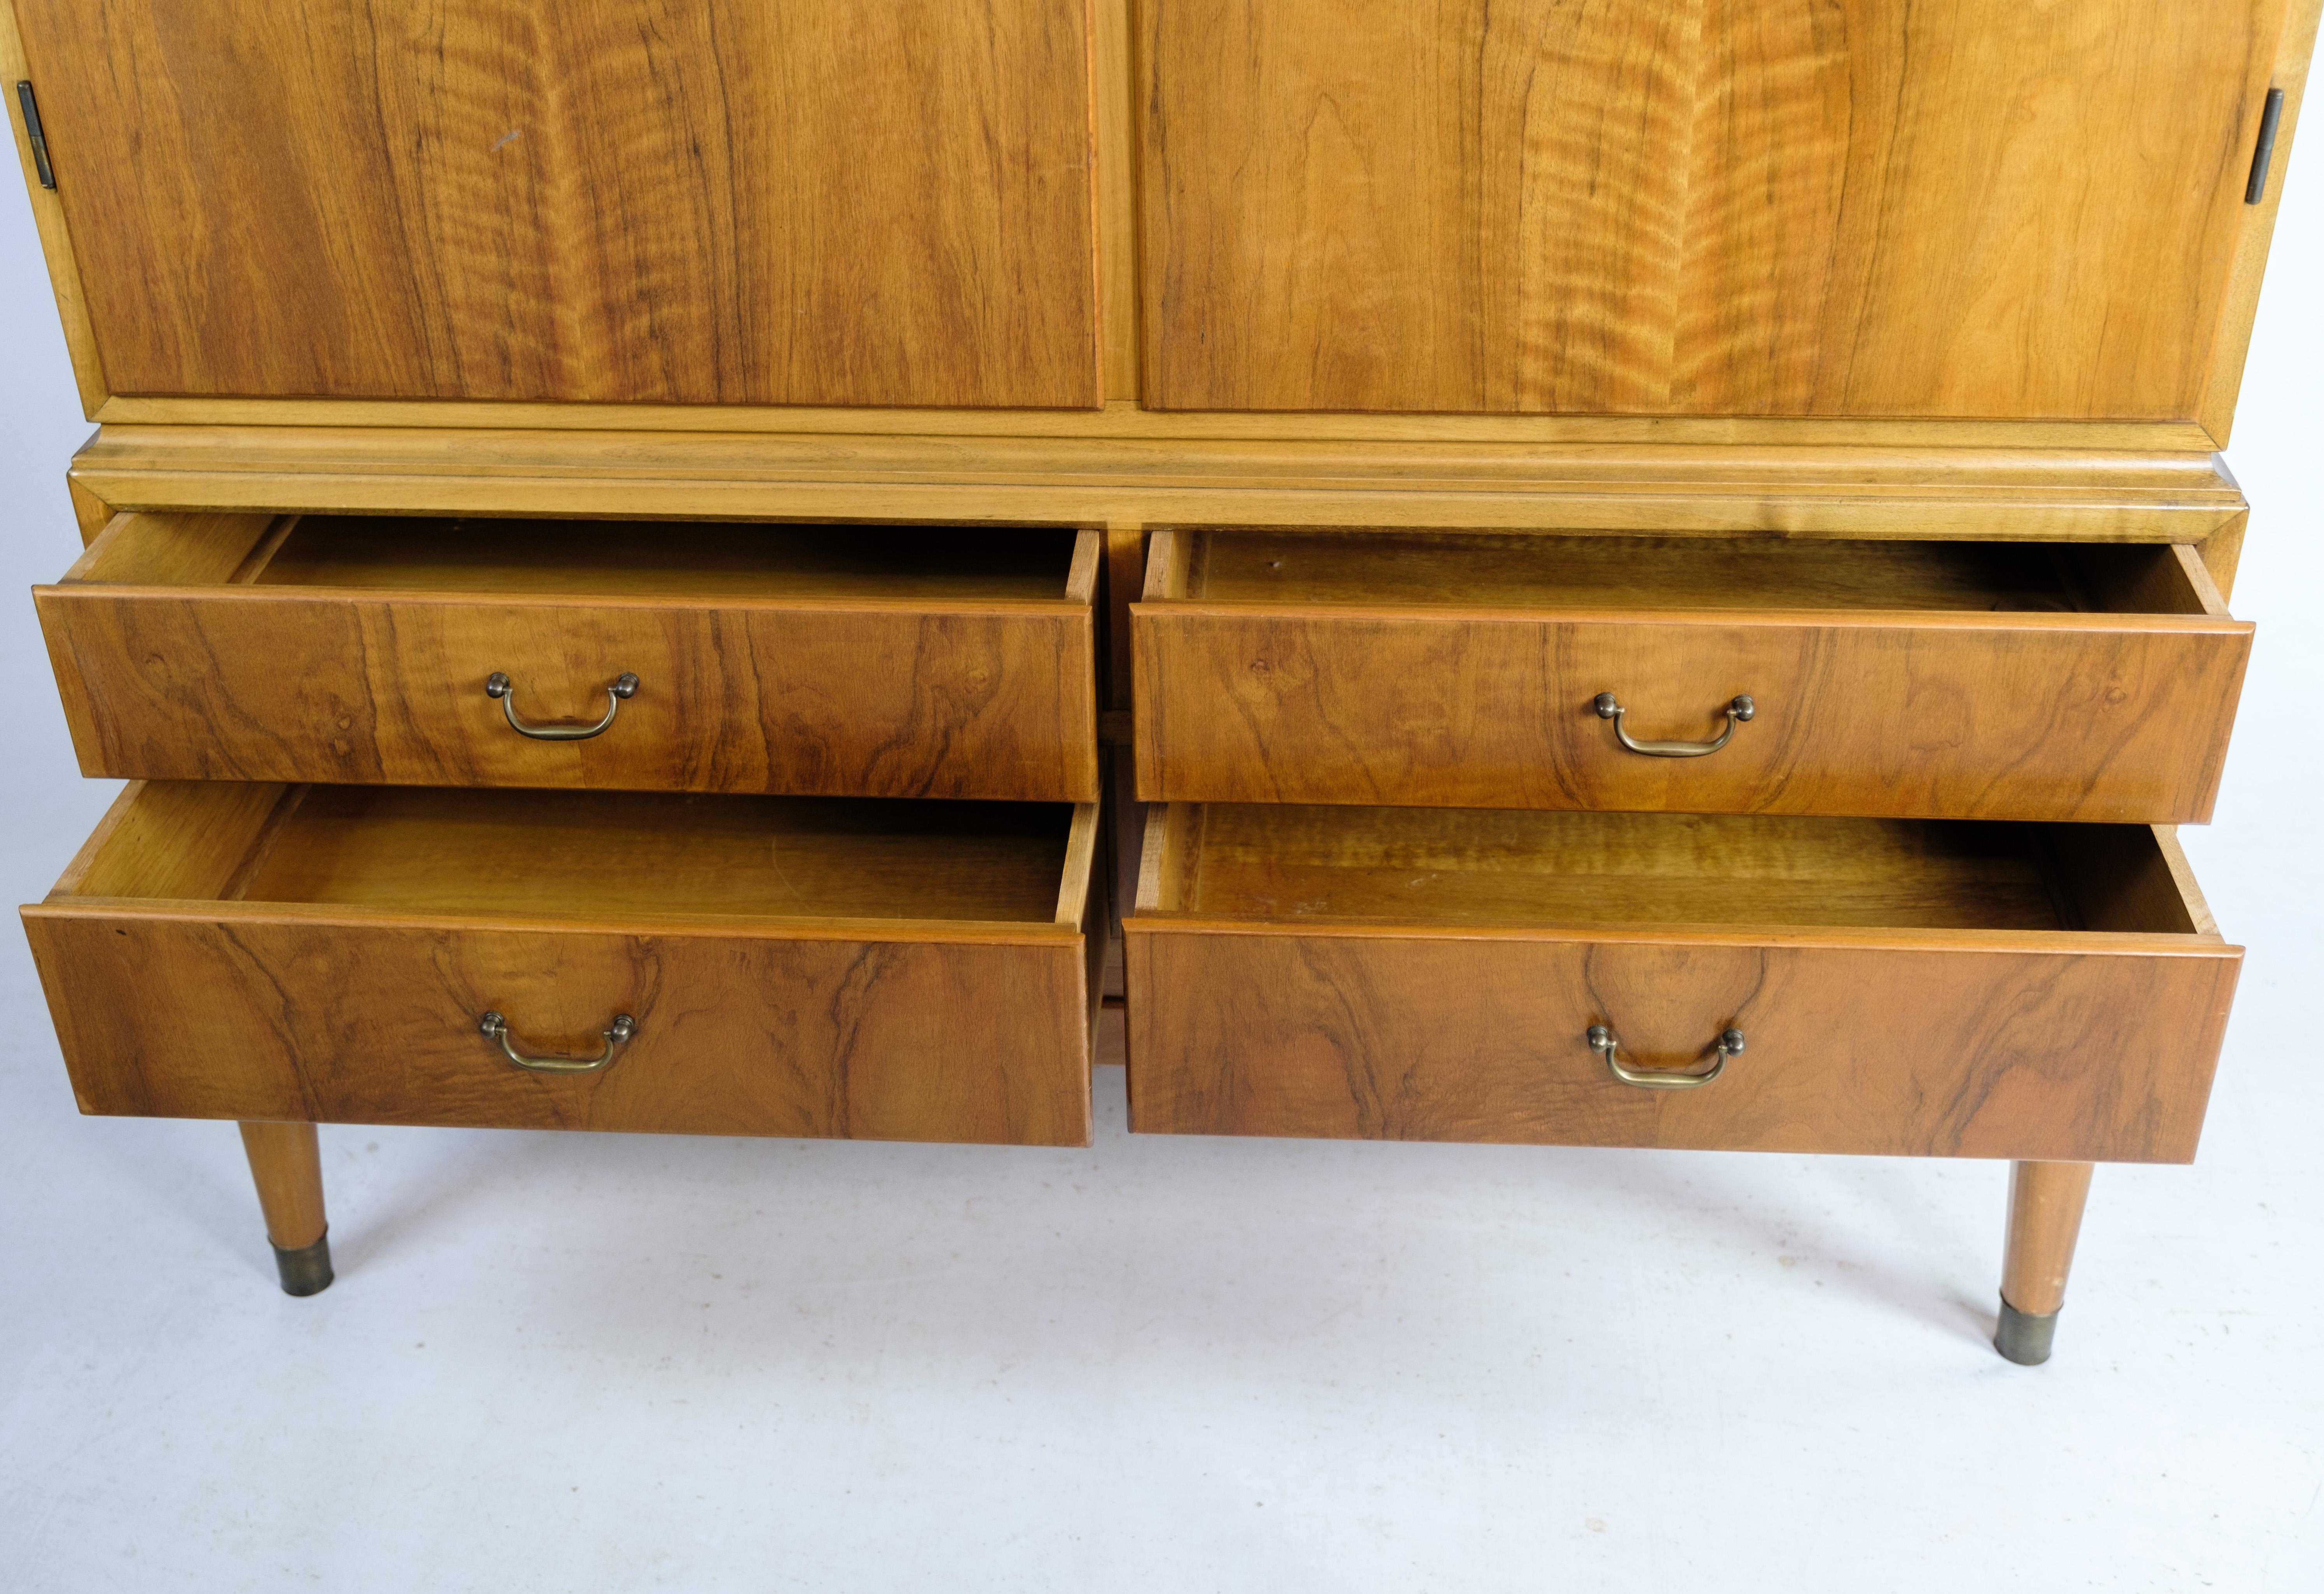 Cutlery cabinet in light walnut by a Danish master carpenter from around the 1940s. The cabinet has 2 doors and 4 drawers. In very good used condition.